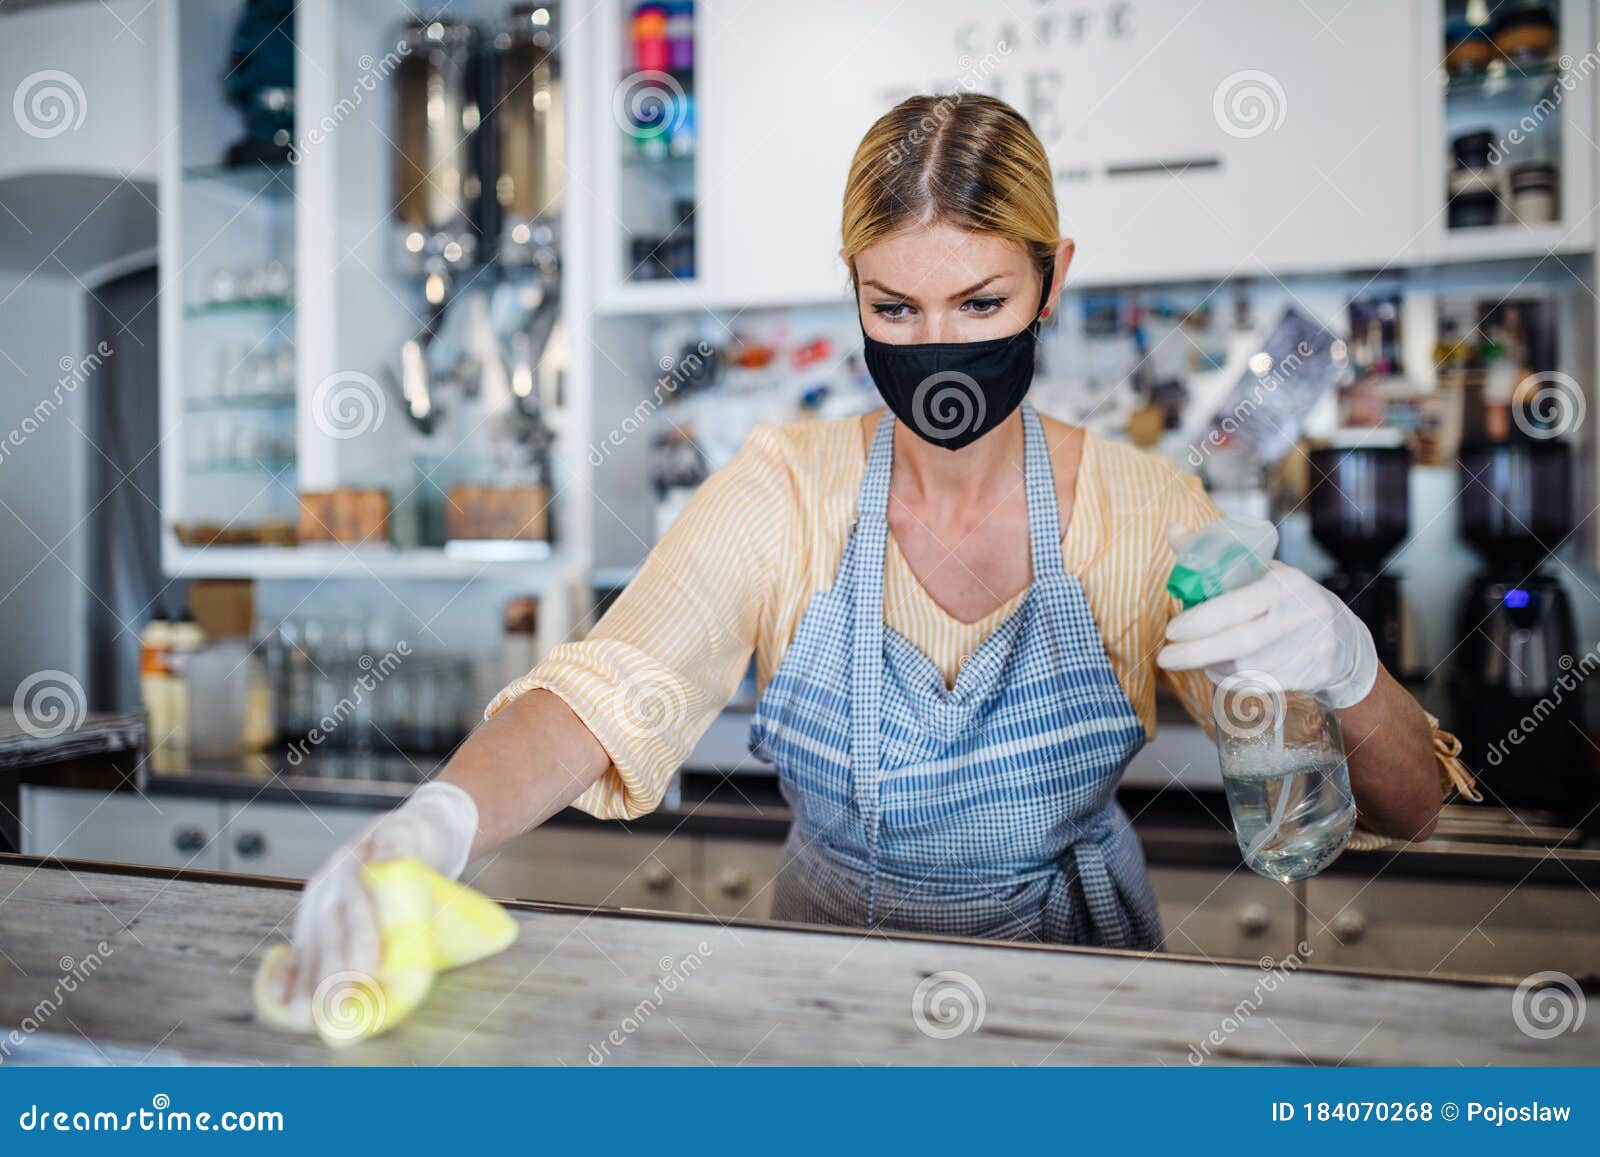 https://thumbs.dreamstime.com/z/coffee-shop-woman-owner-working-face-mask-gloves-disinfecting-counter-cleaning-184070268.jpg